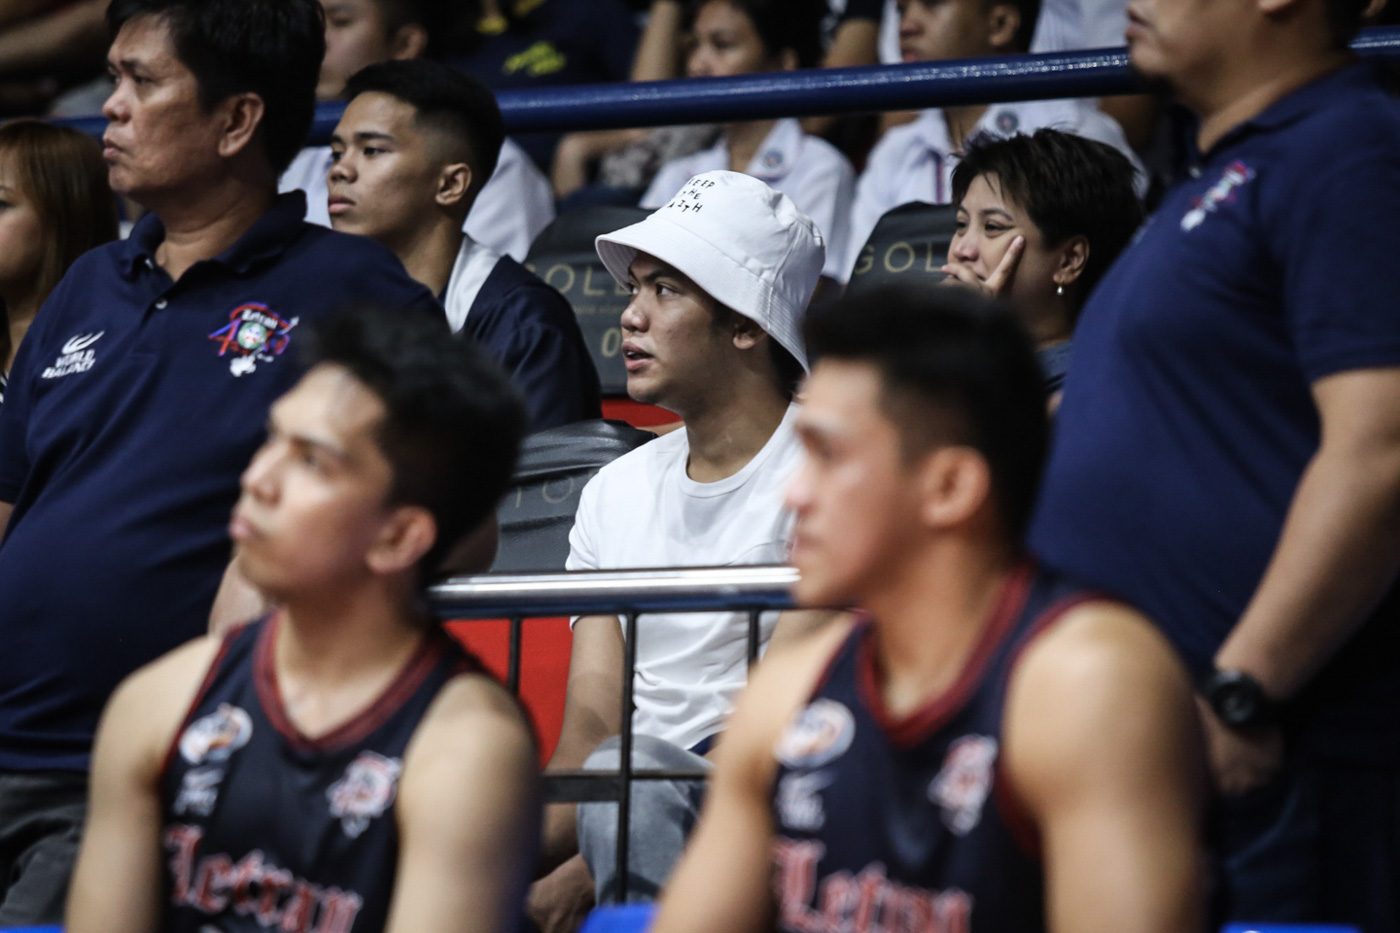 Balanza expects Letran to ‘play like a champion’ vs Lyceum